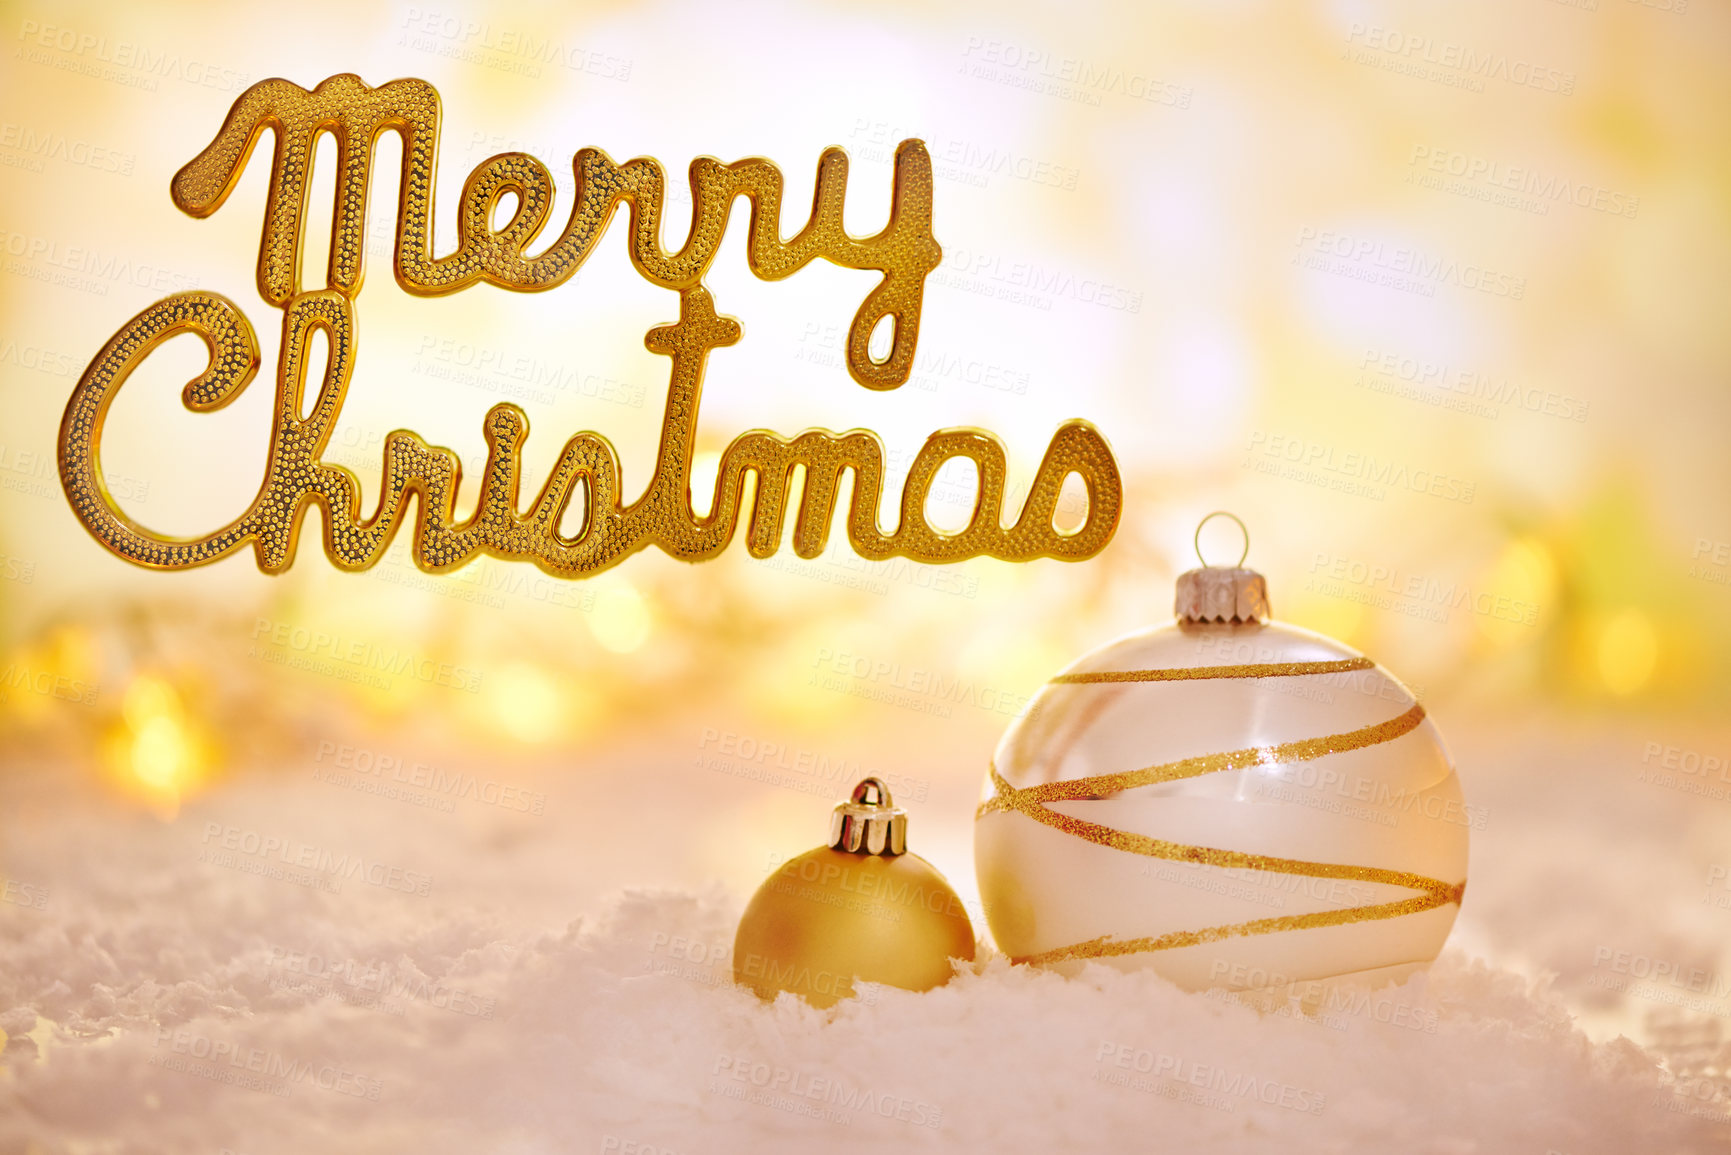 Buy stock photo Shot of golden Christmas decorations with a "merry christmas" message